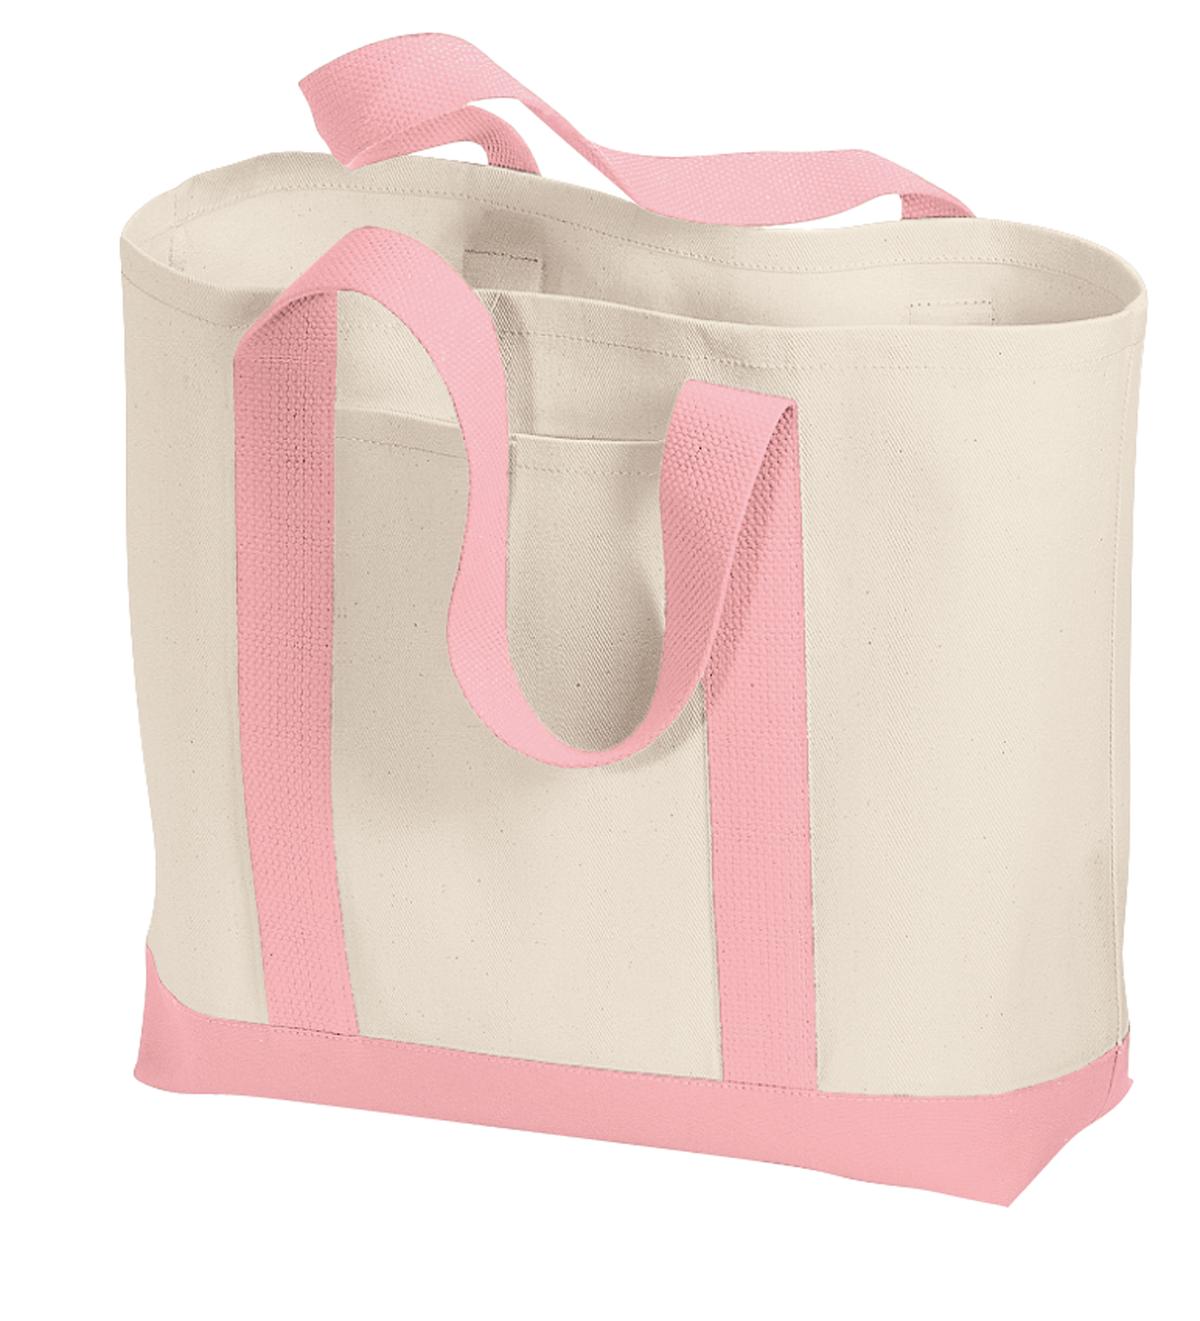 Pink Two-Tone Boat Tote by sleepy pup